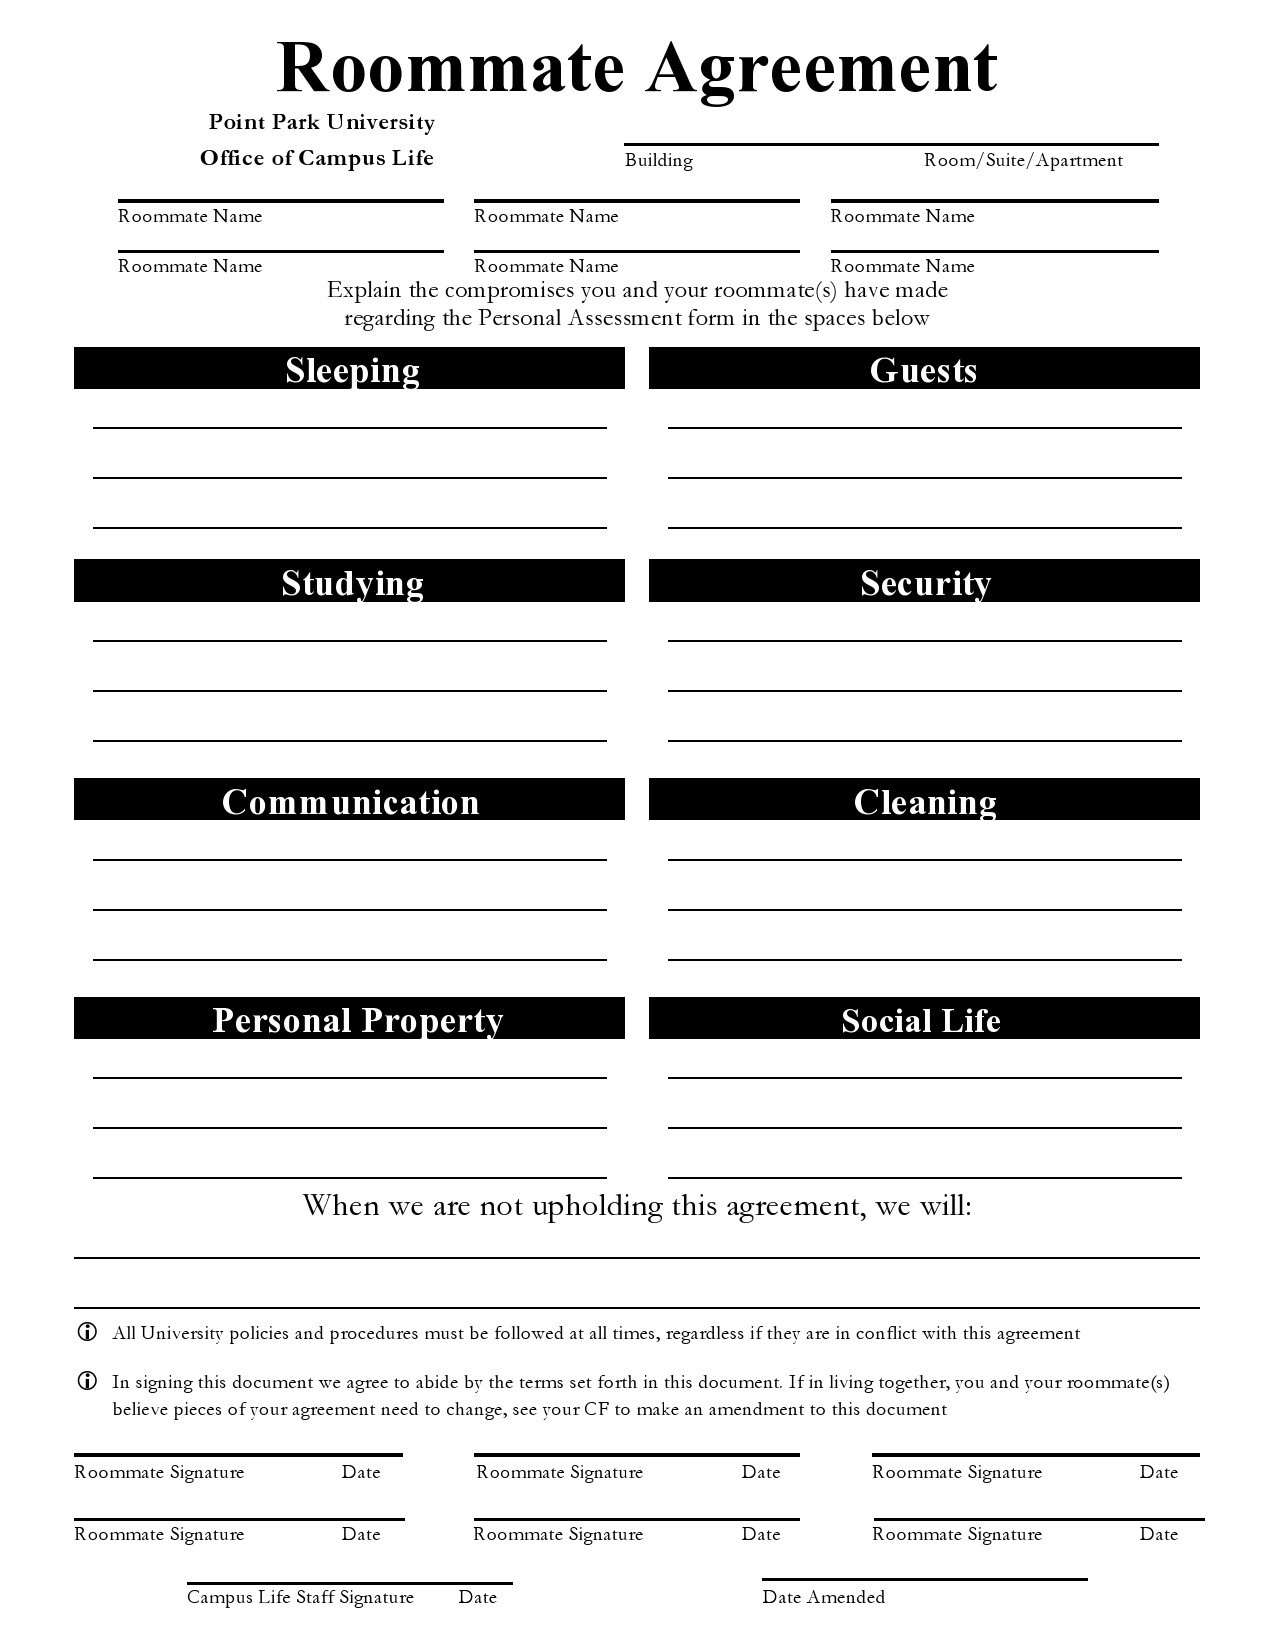 Free roommate agreement template 02